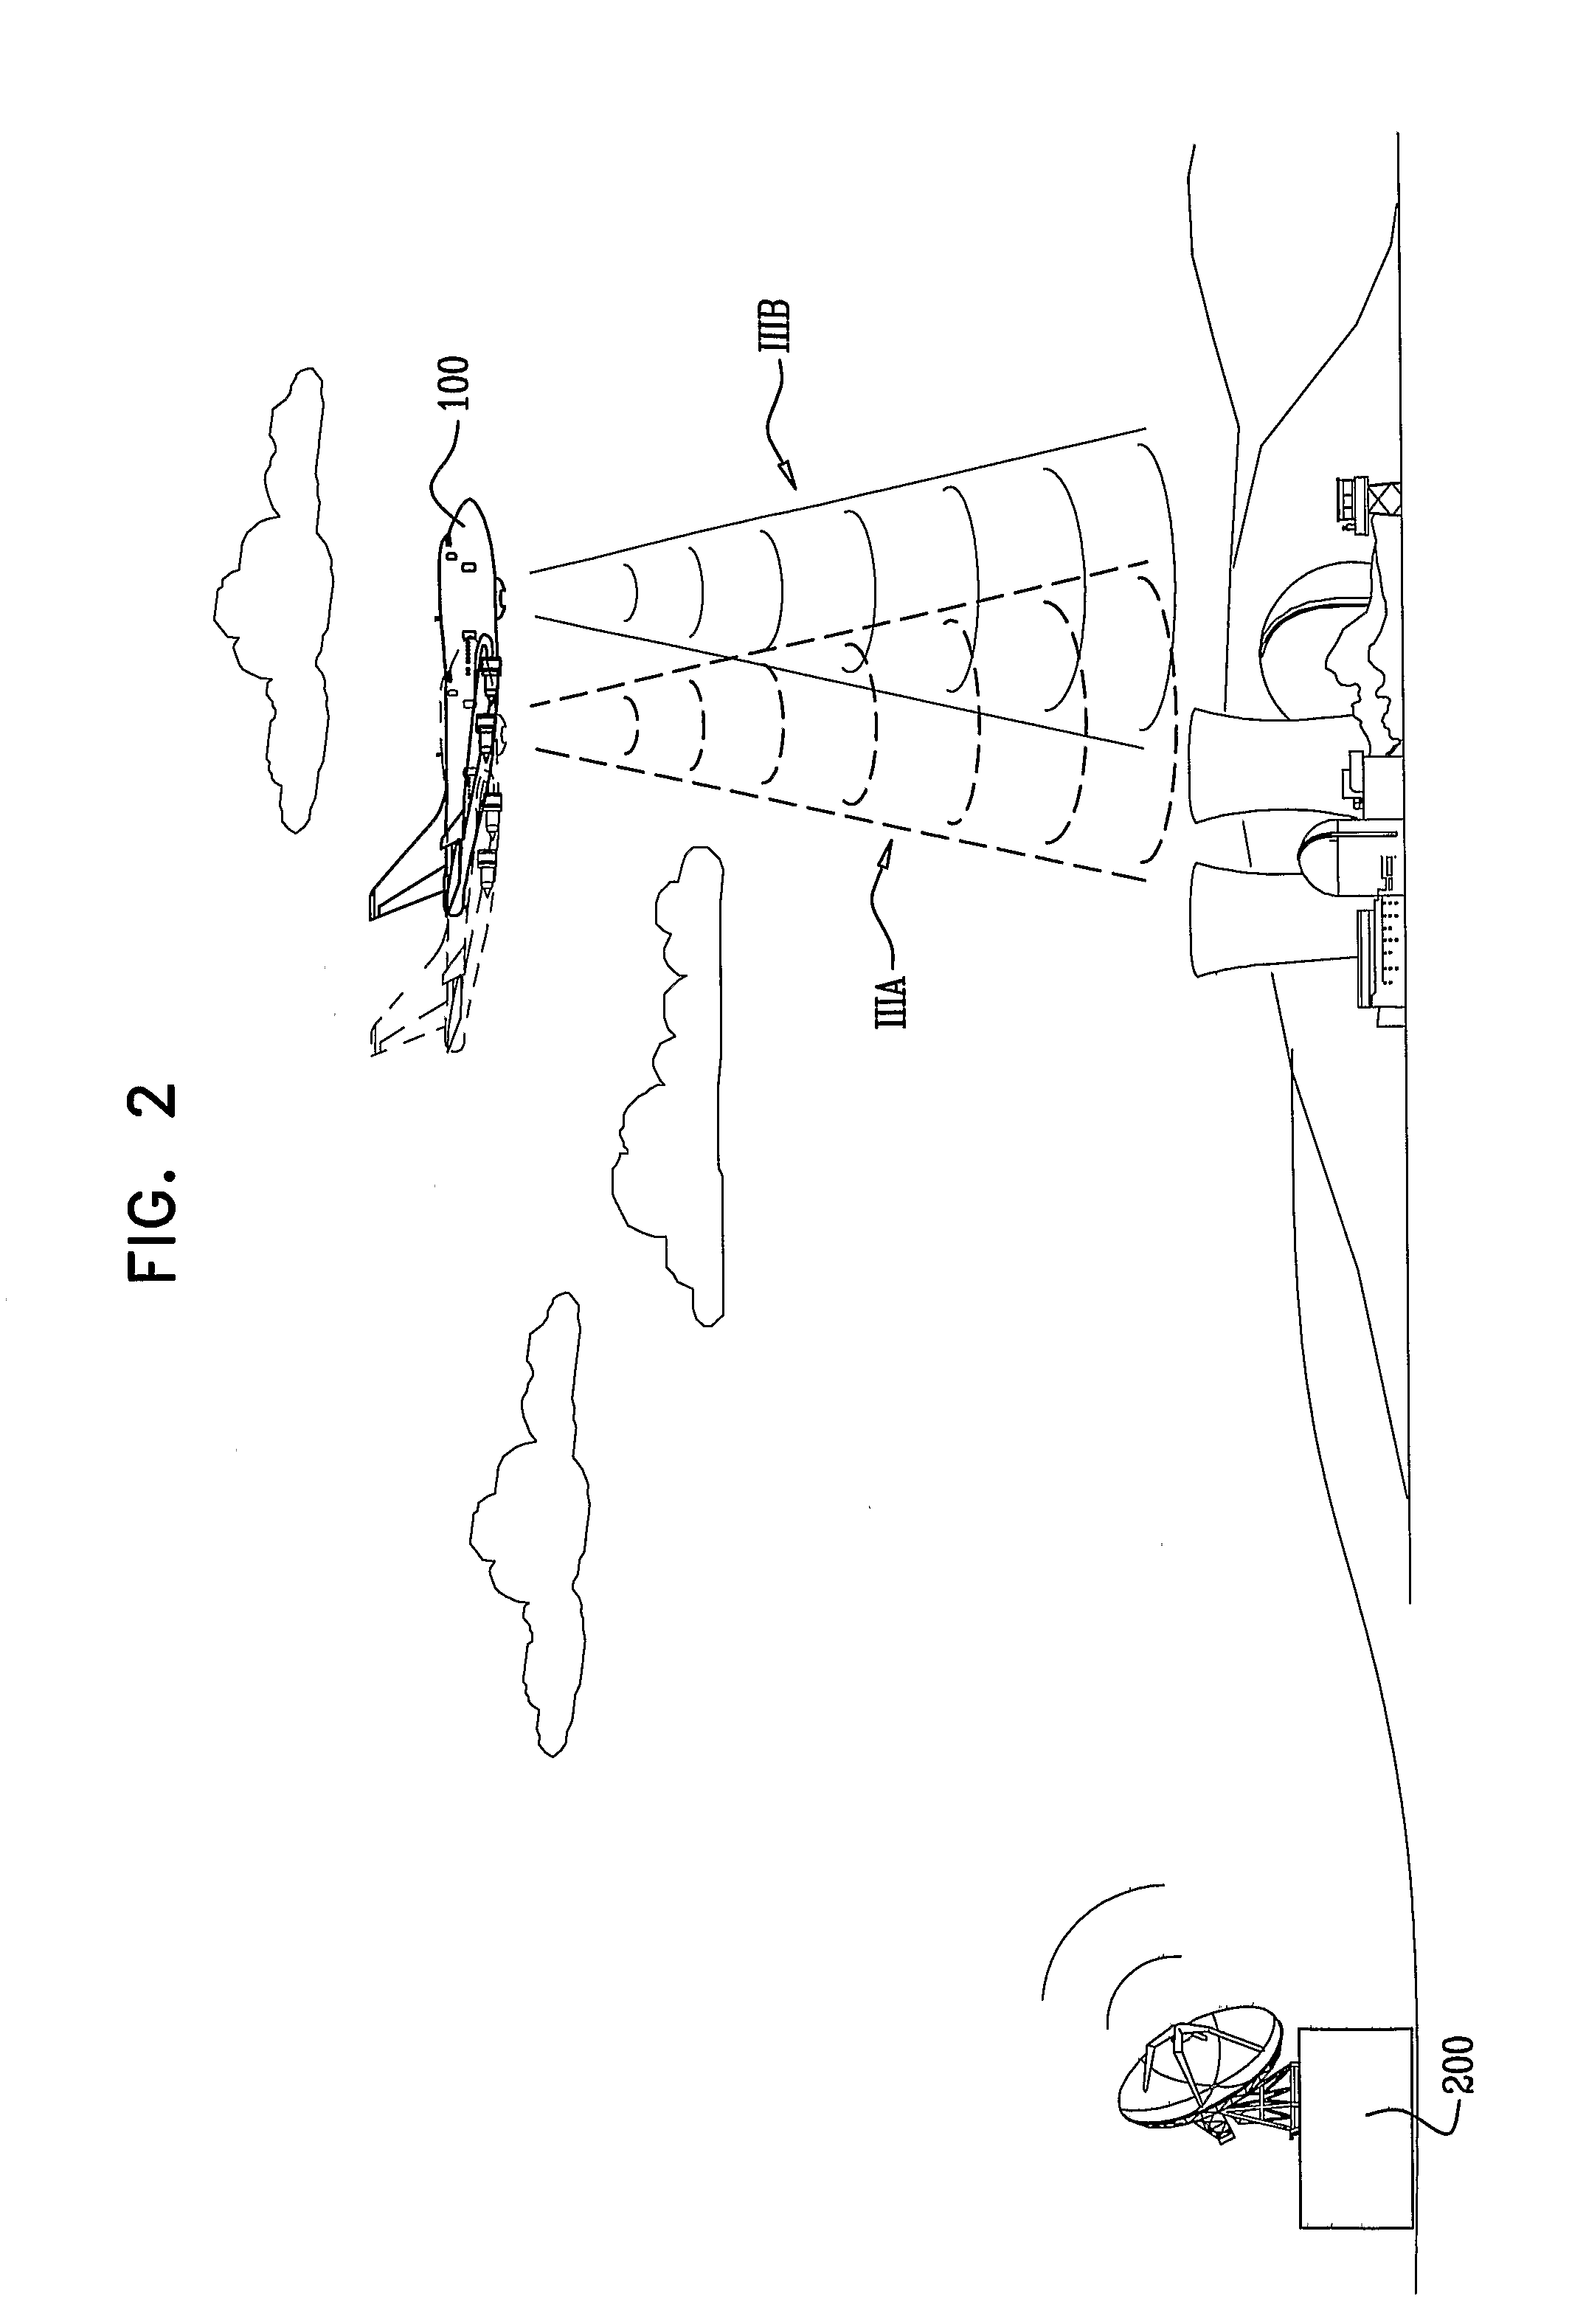 Method and system to perform optical moving object detection and tracking over a wide area